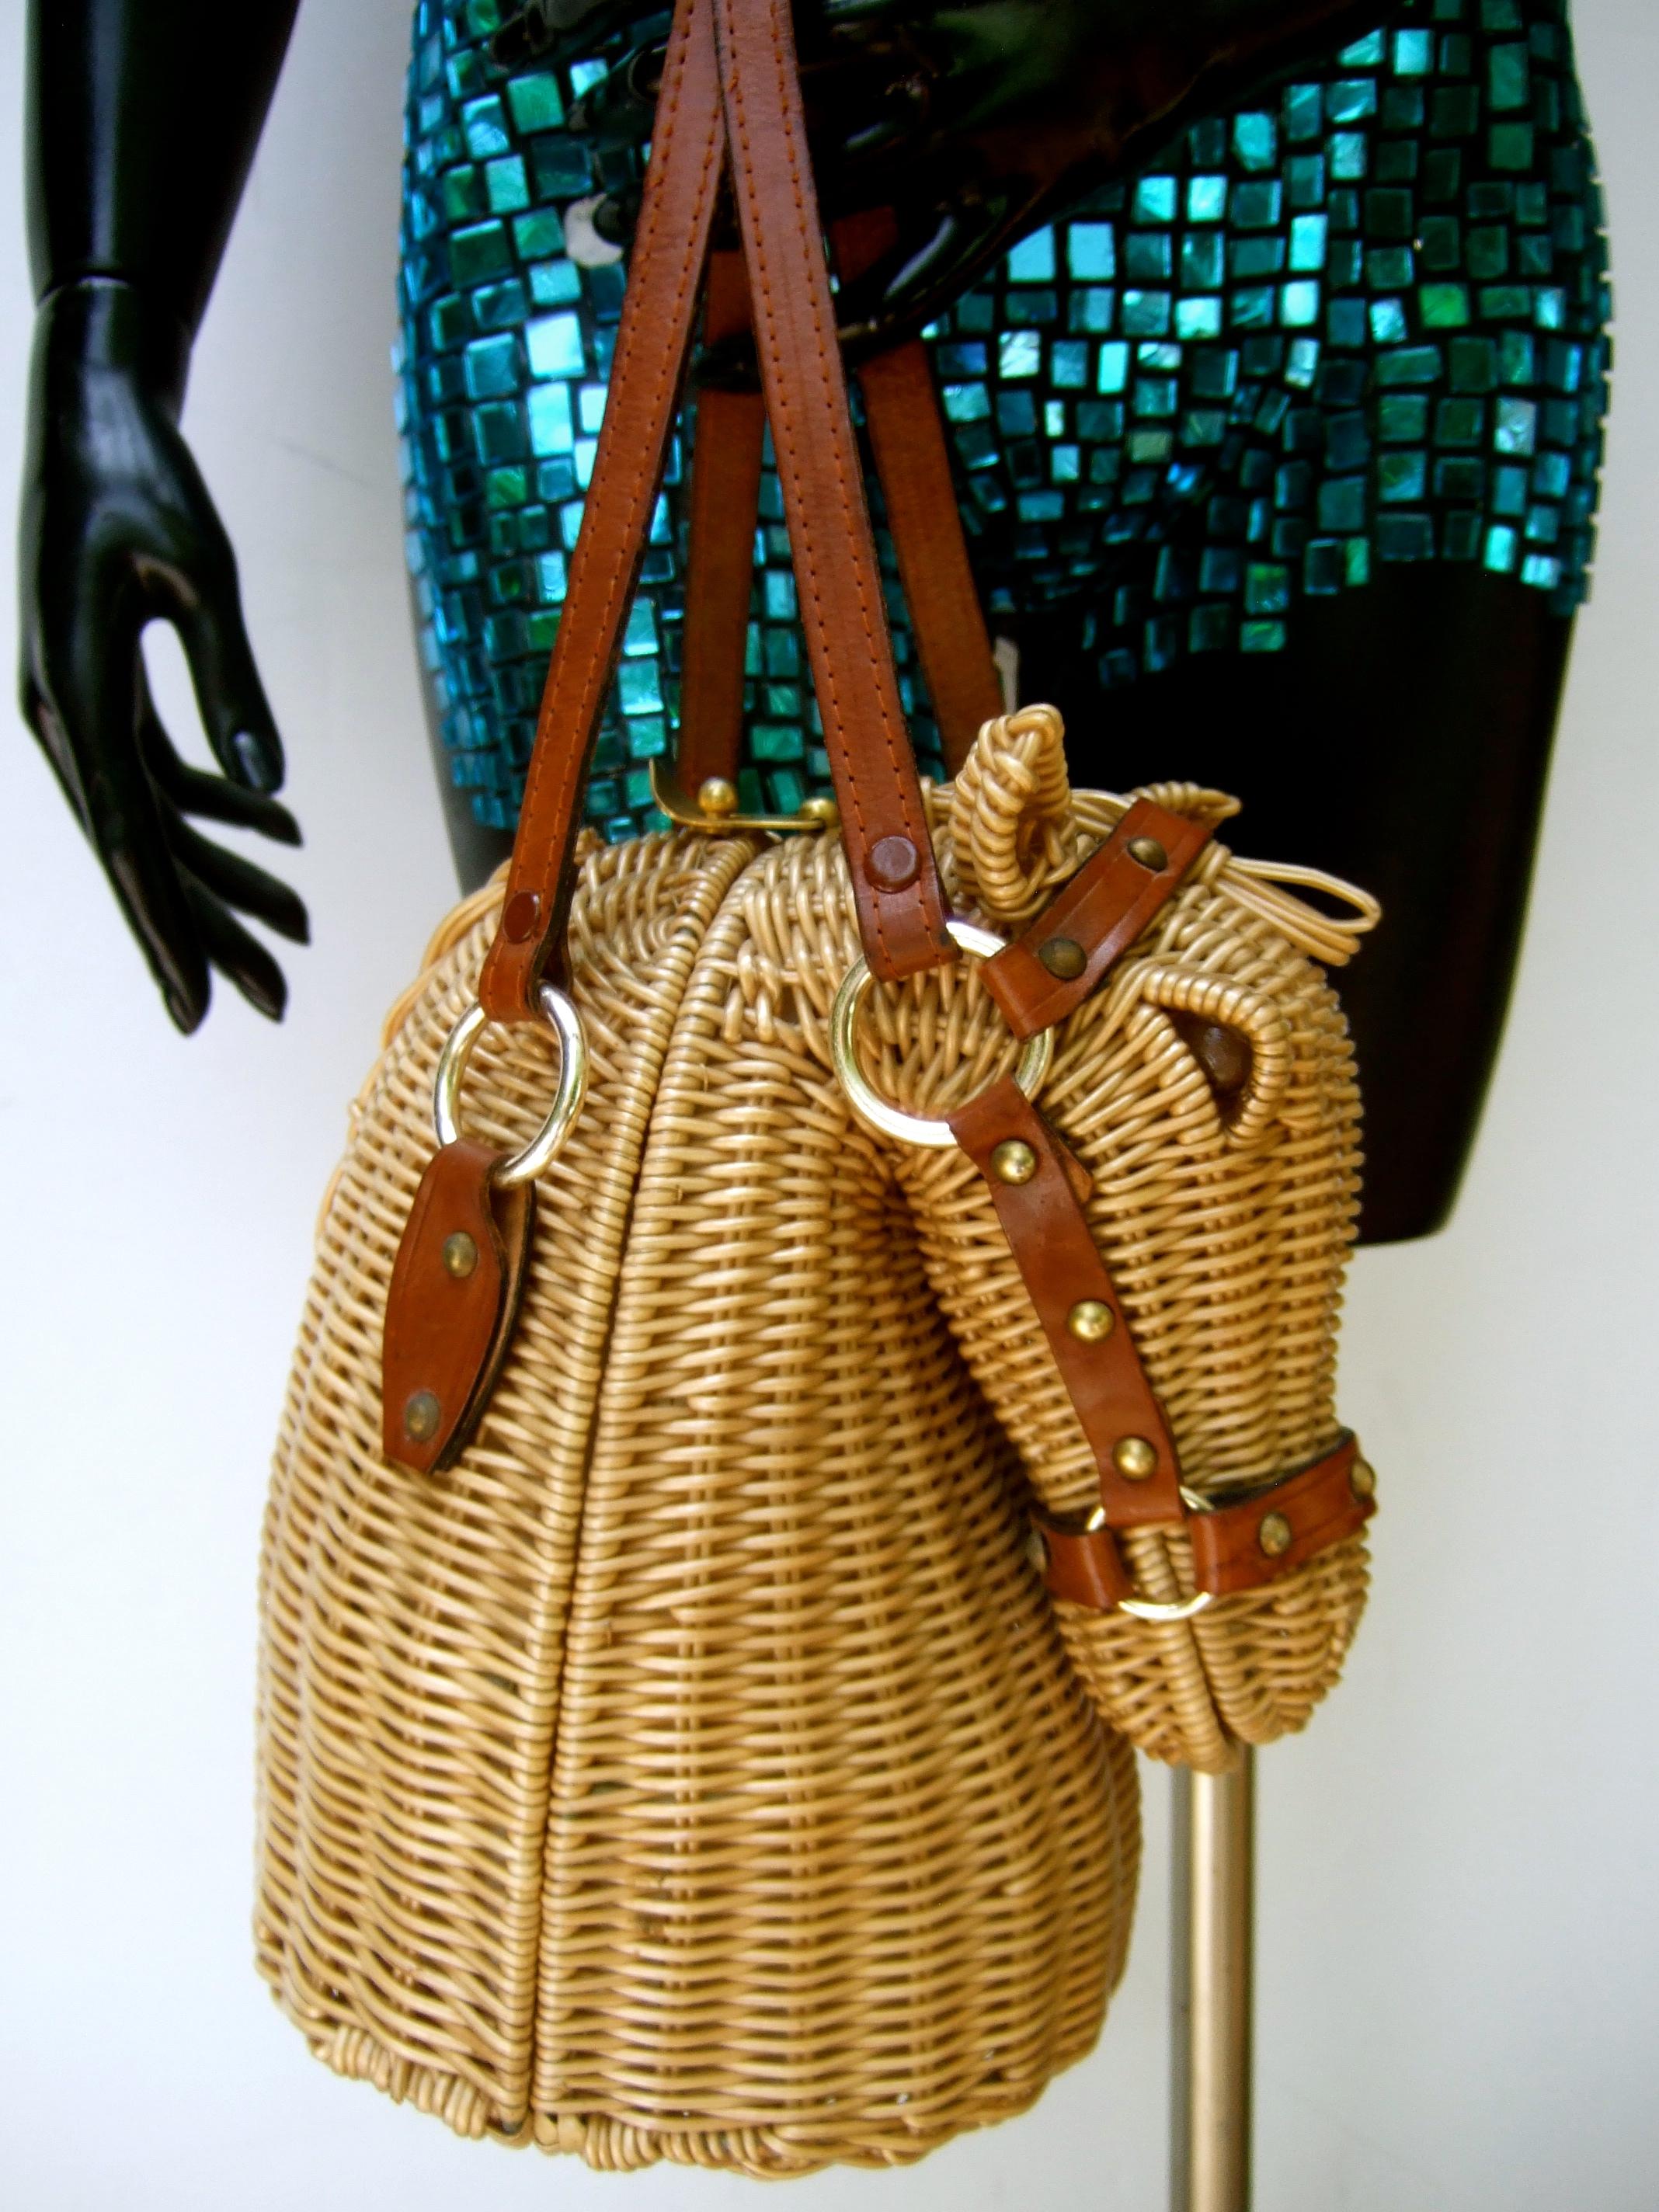 Women's Extremely Rare Wicker Rattan Equine Handbag Designed by Marcus Brothers c 1970